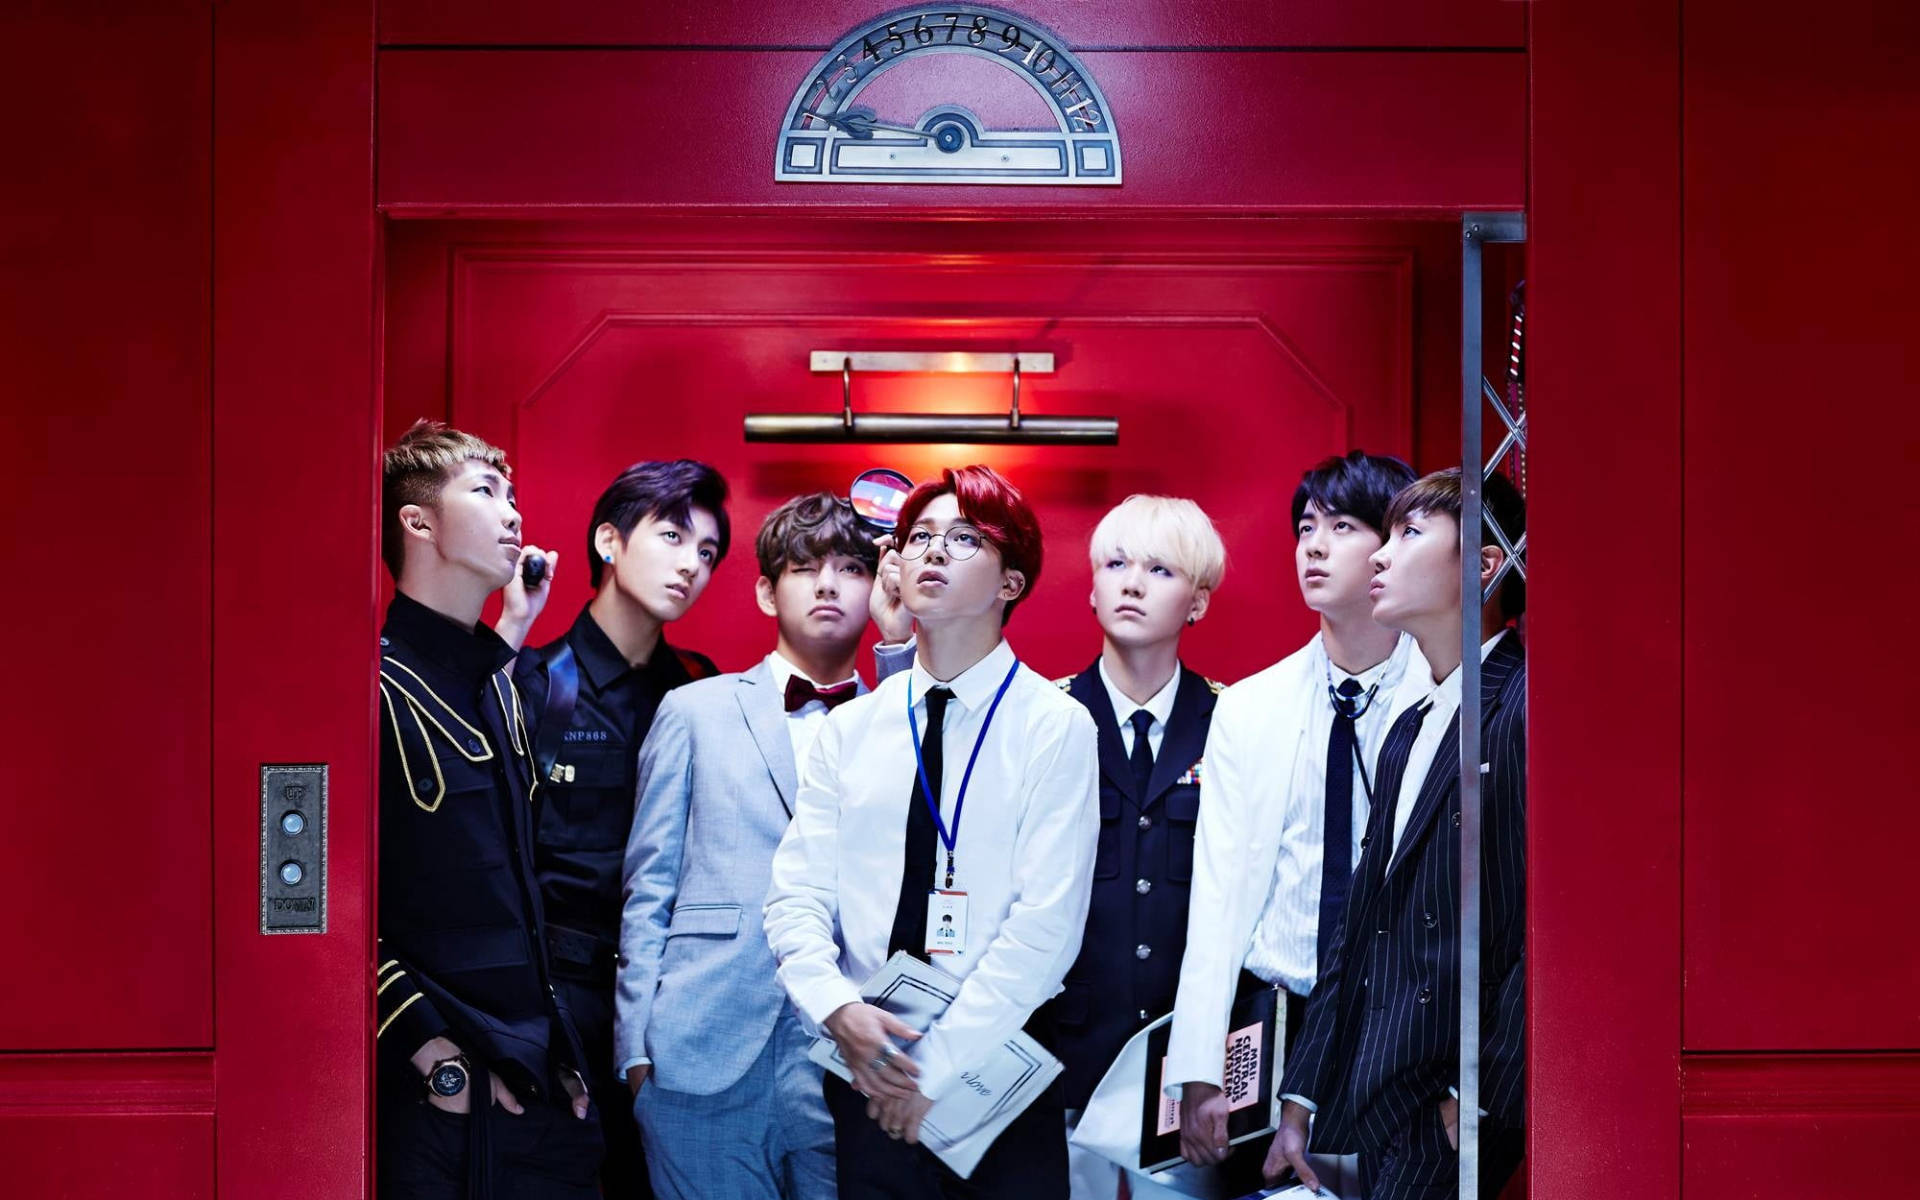 Cute Bts Group In A Red Elevator Background